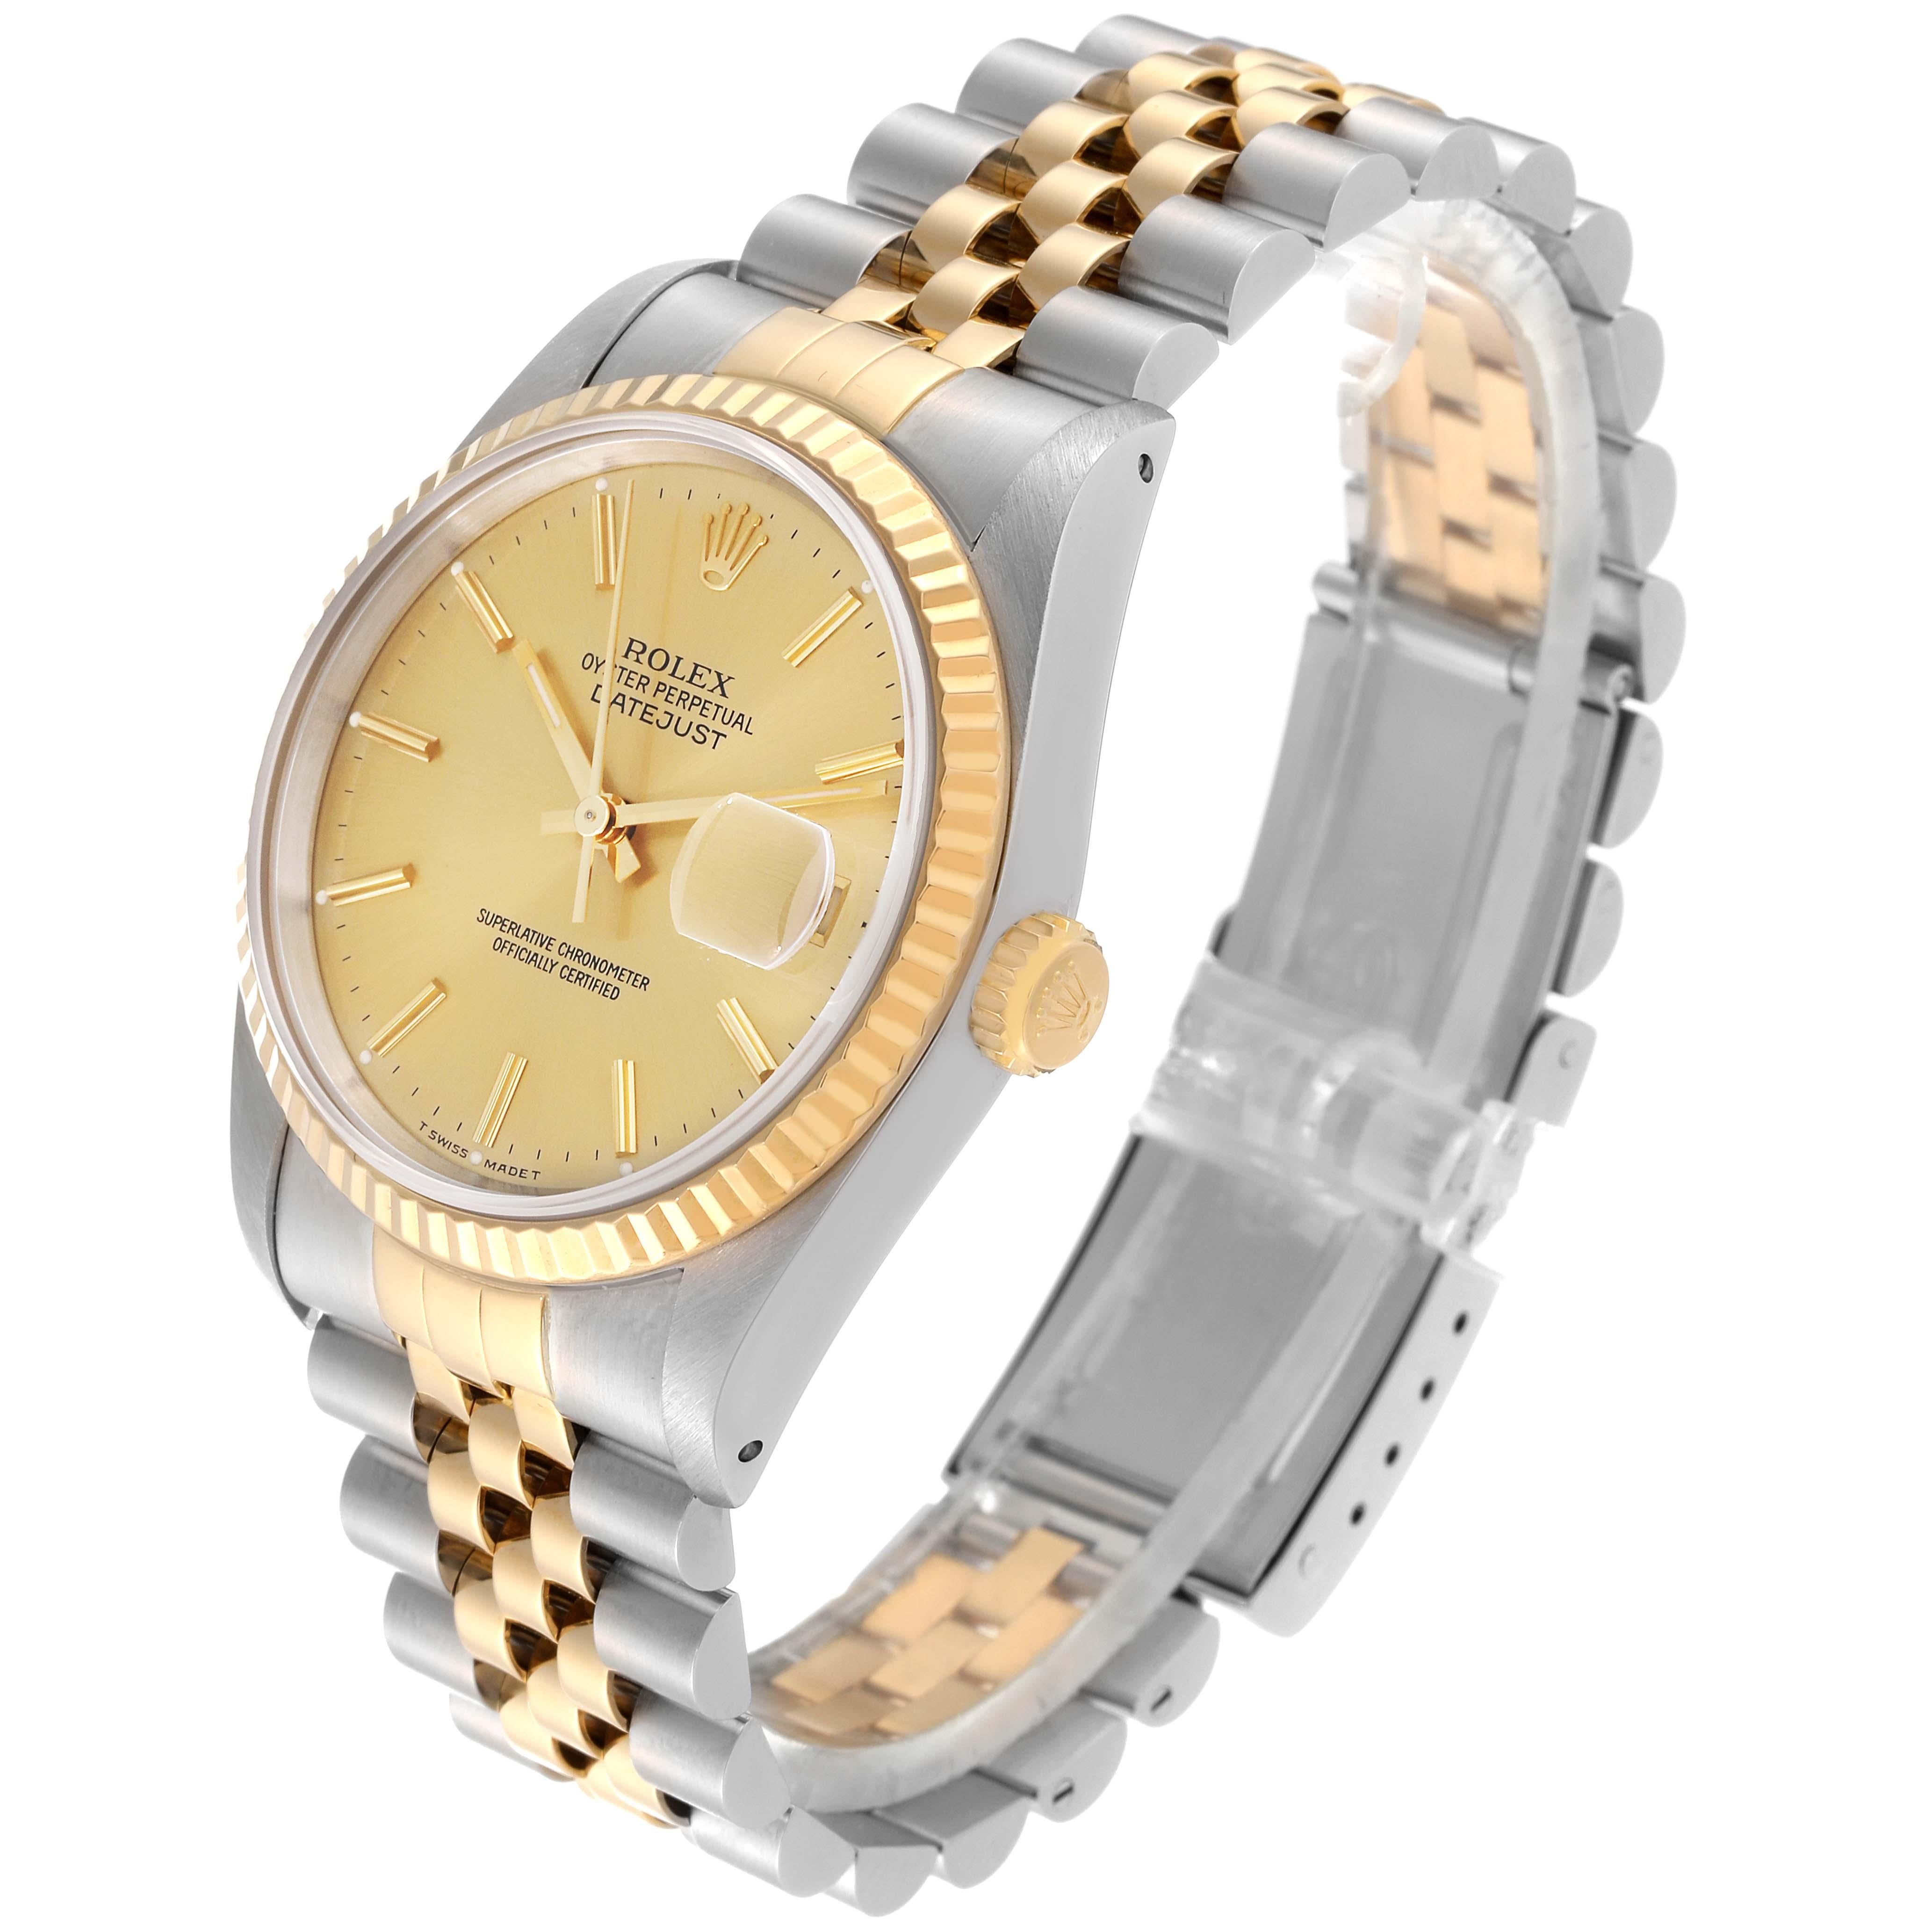 Rolex Datejust 36 Steel Yellow Gold Champagne Dial Mens Watch 16233 For Sale 6